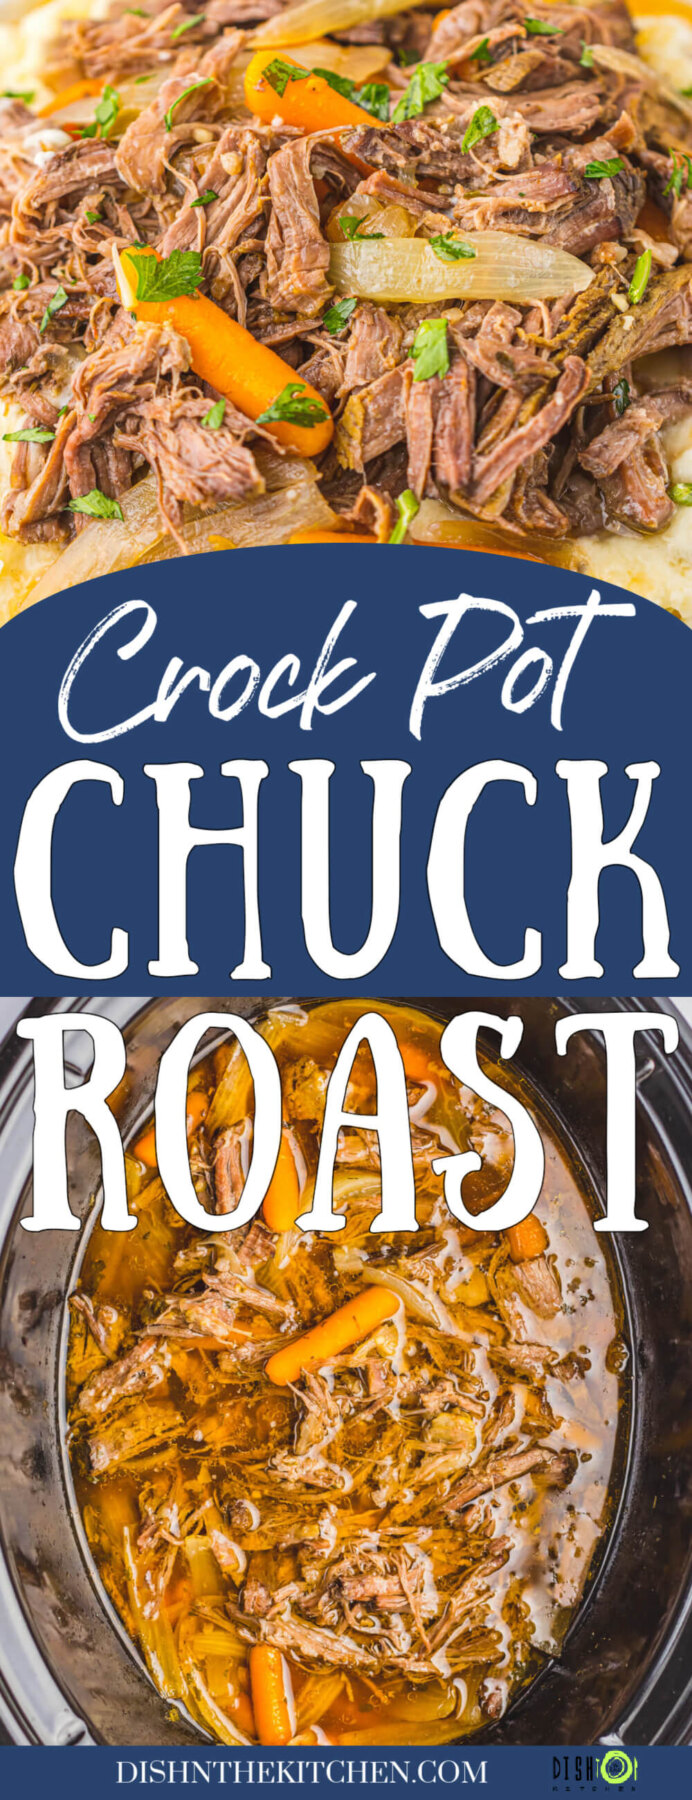 Pinterest image featuring perfectly shredded crock pot chuck roast on a plate and in a crock pot.